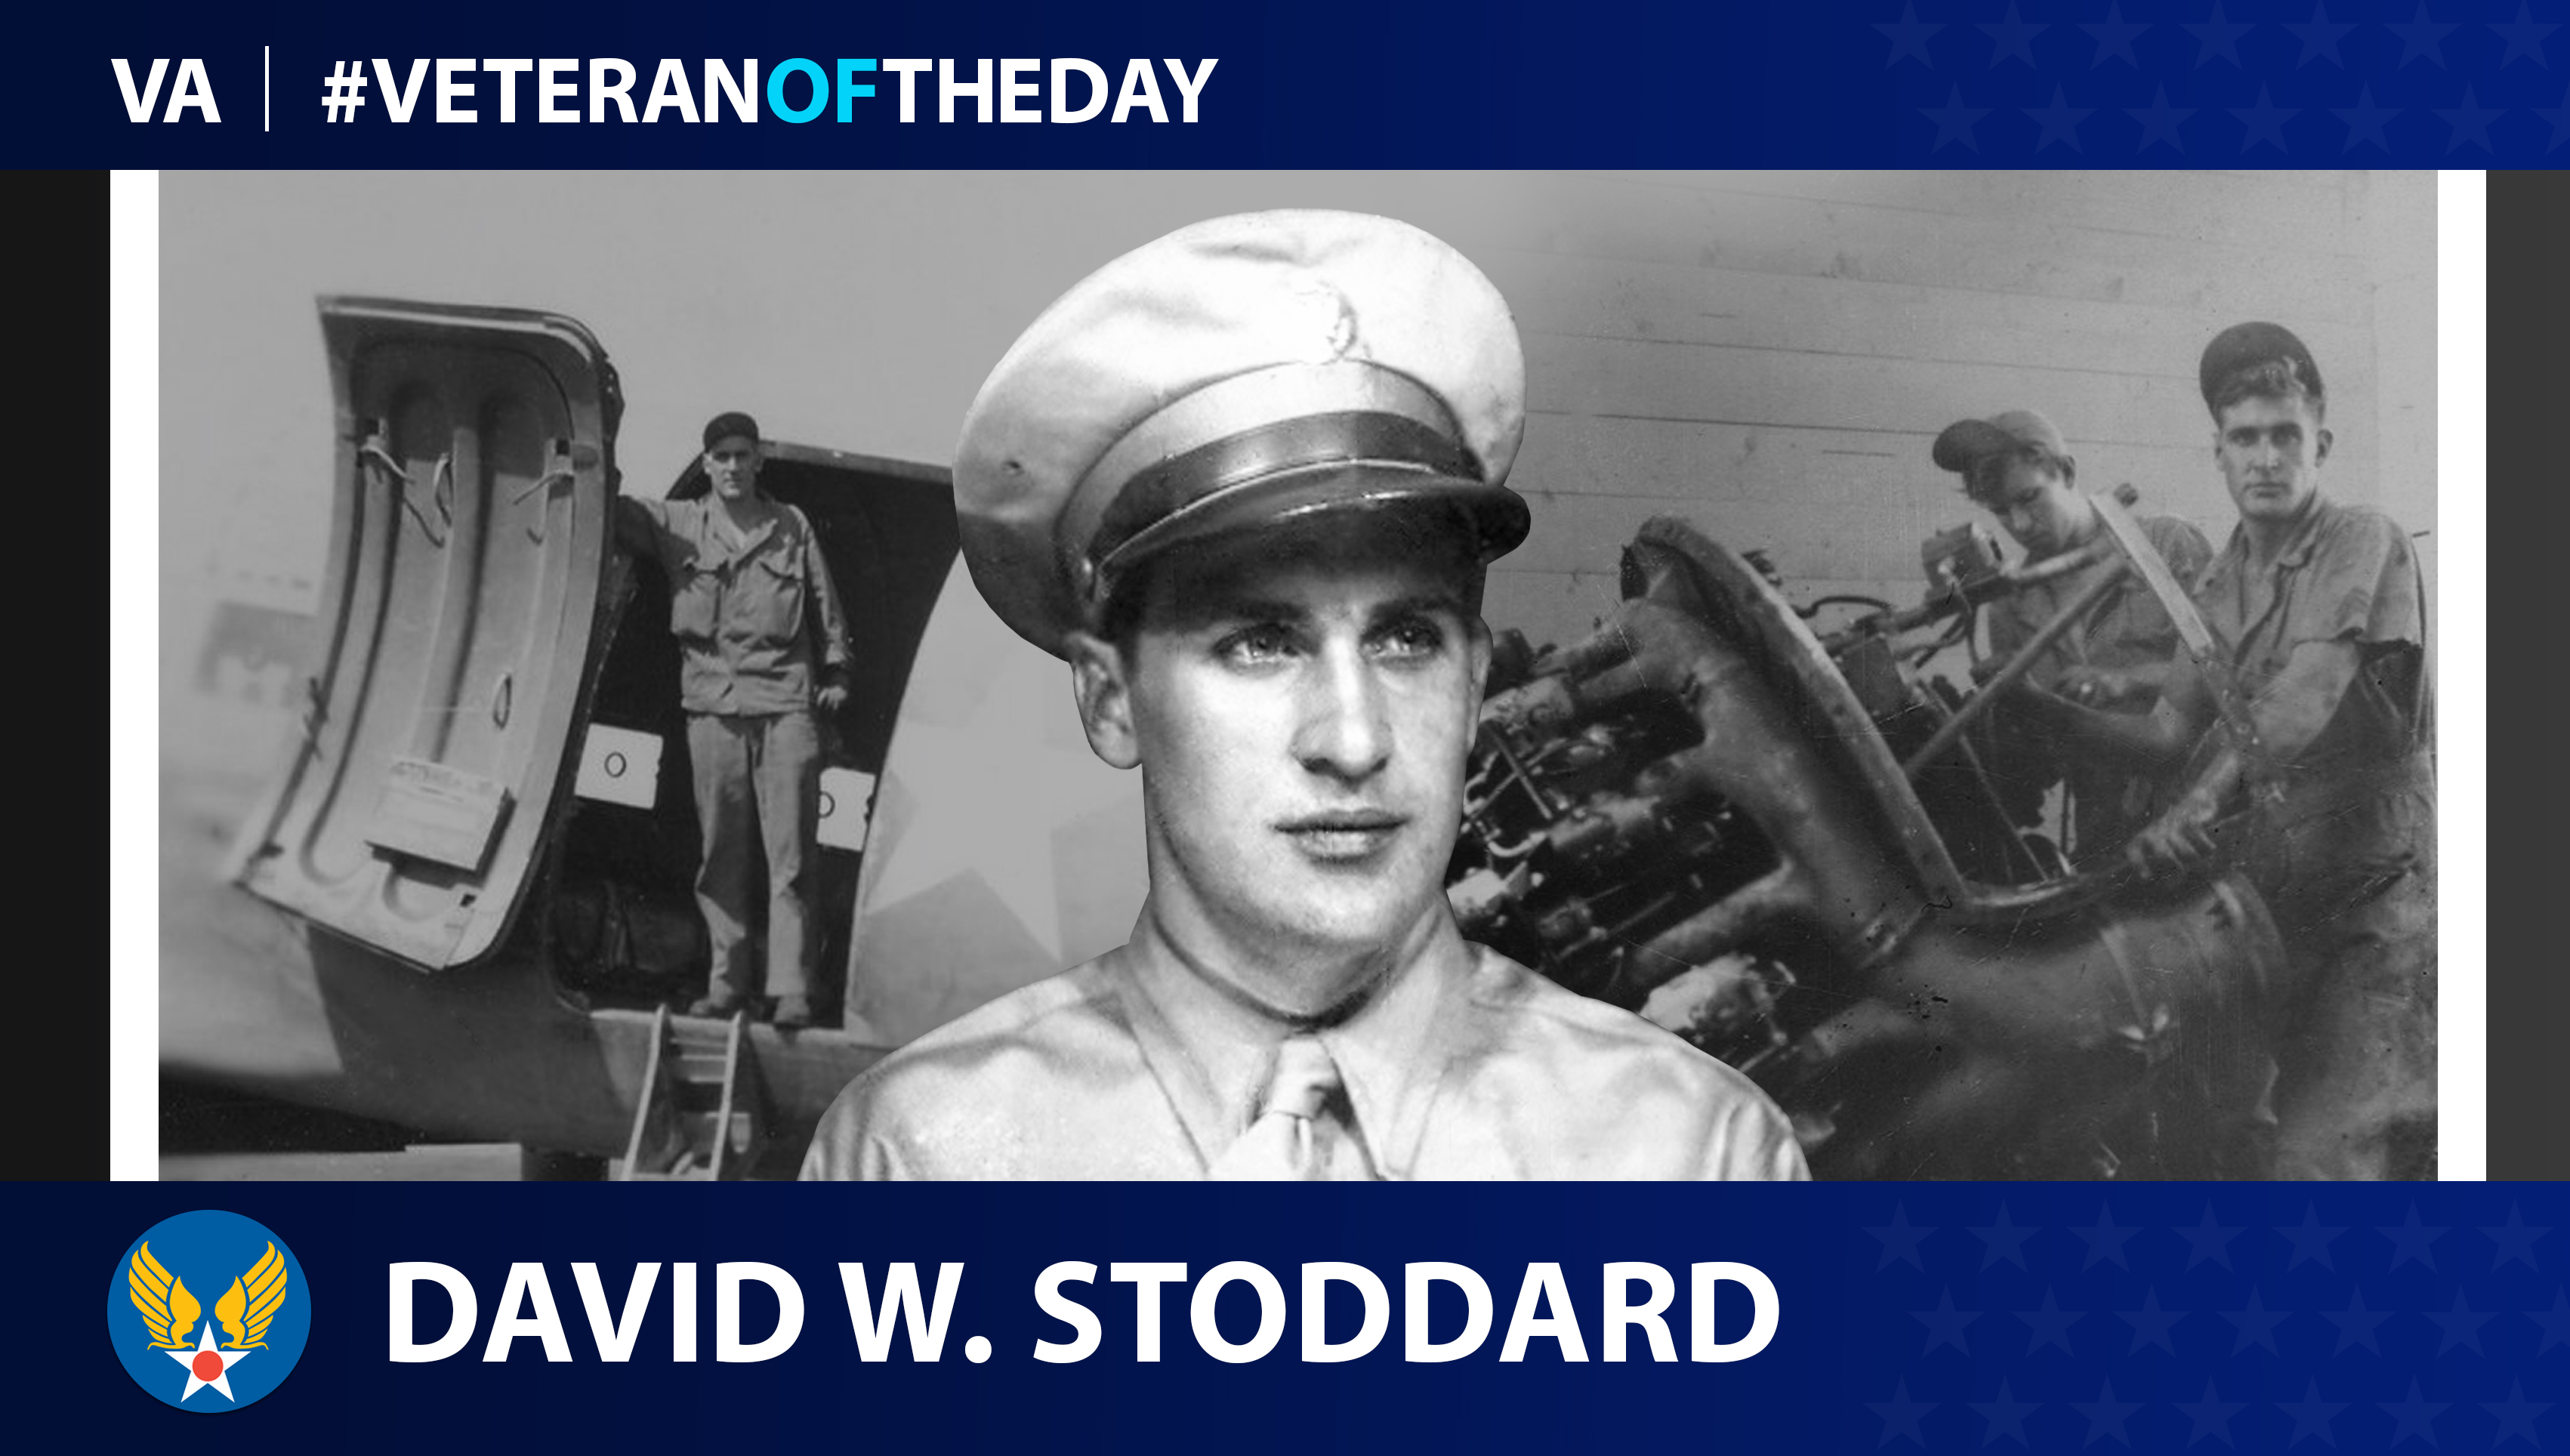 Army Air Forces Veteran David W. Stoddard is today's Veteran of the Day.